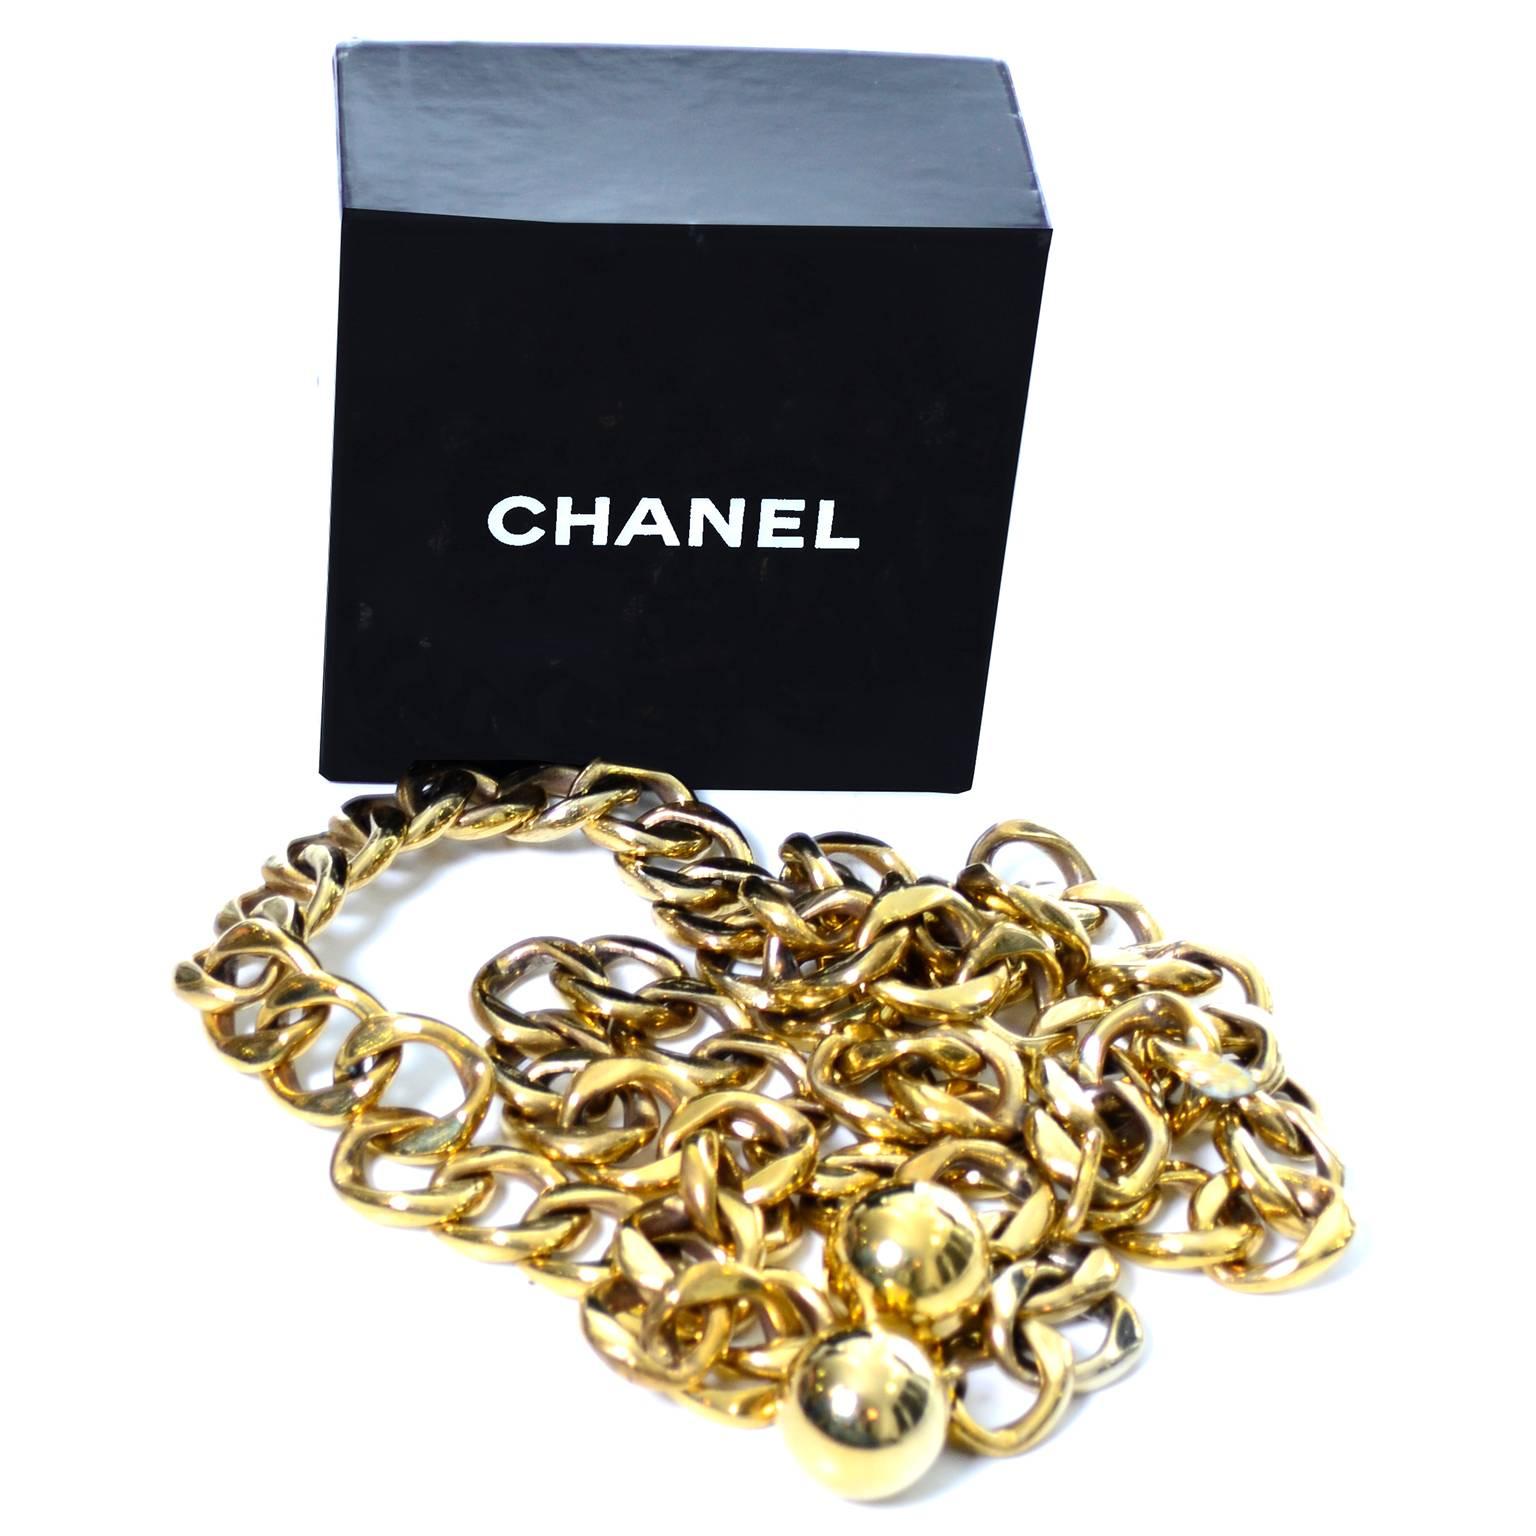 This is one of my personal favorite Chanel belts. It has a double row of gold links in the front and a single row in the back and closes with a gold hook.  There are heavy gold balls that hang on the end.  The belt has an adjustable fit and could